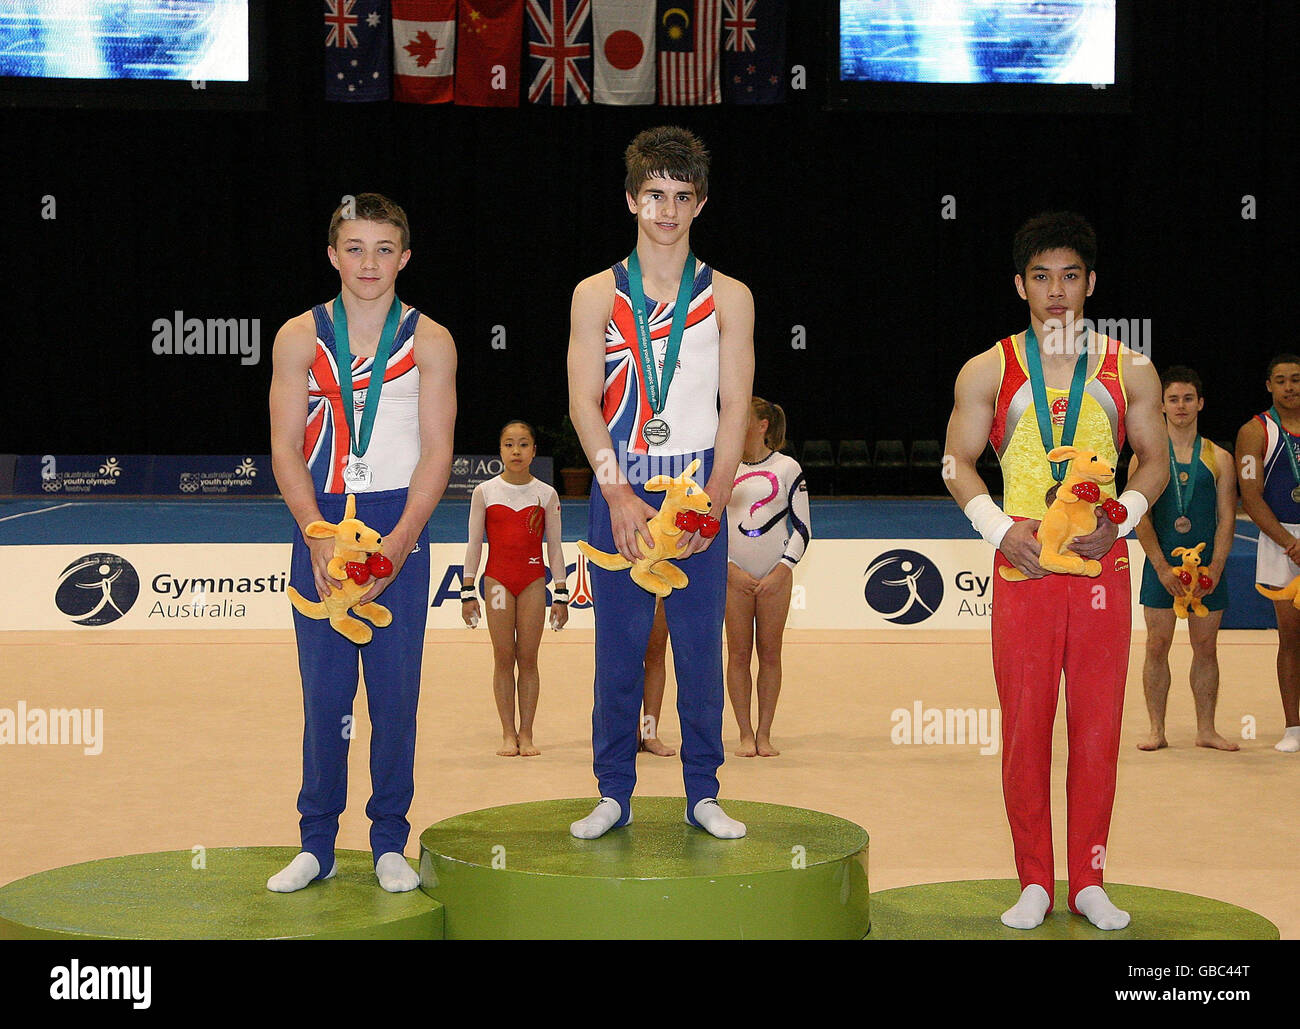 Great Britain's Max Whitlock wins Gold, Sam Oldham Silver with Zhanteng Liu of China Bronze at the Artistic Gymnastics Apparatus Final during the Australian Youth Olympic Festival 2009 at Sydney Olympic Park, Sydney, Australia. Stock Photo